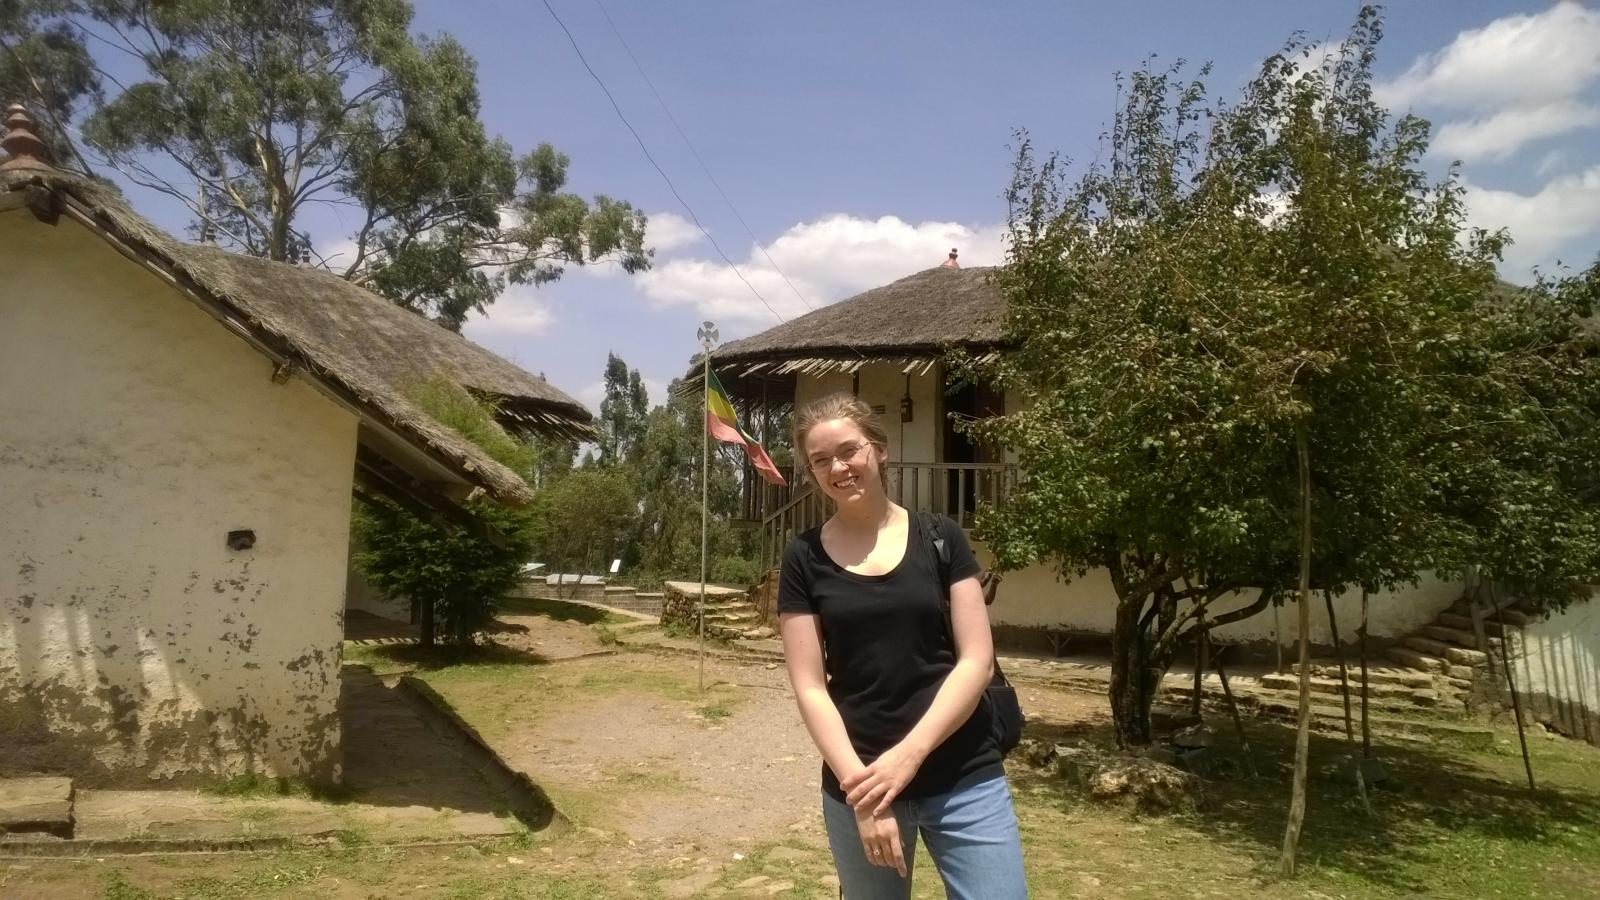 PhD Student Caitlin Clary doing field work in Ethiopia